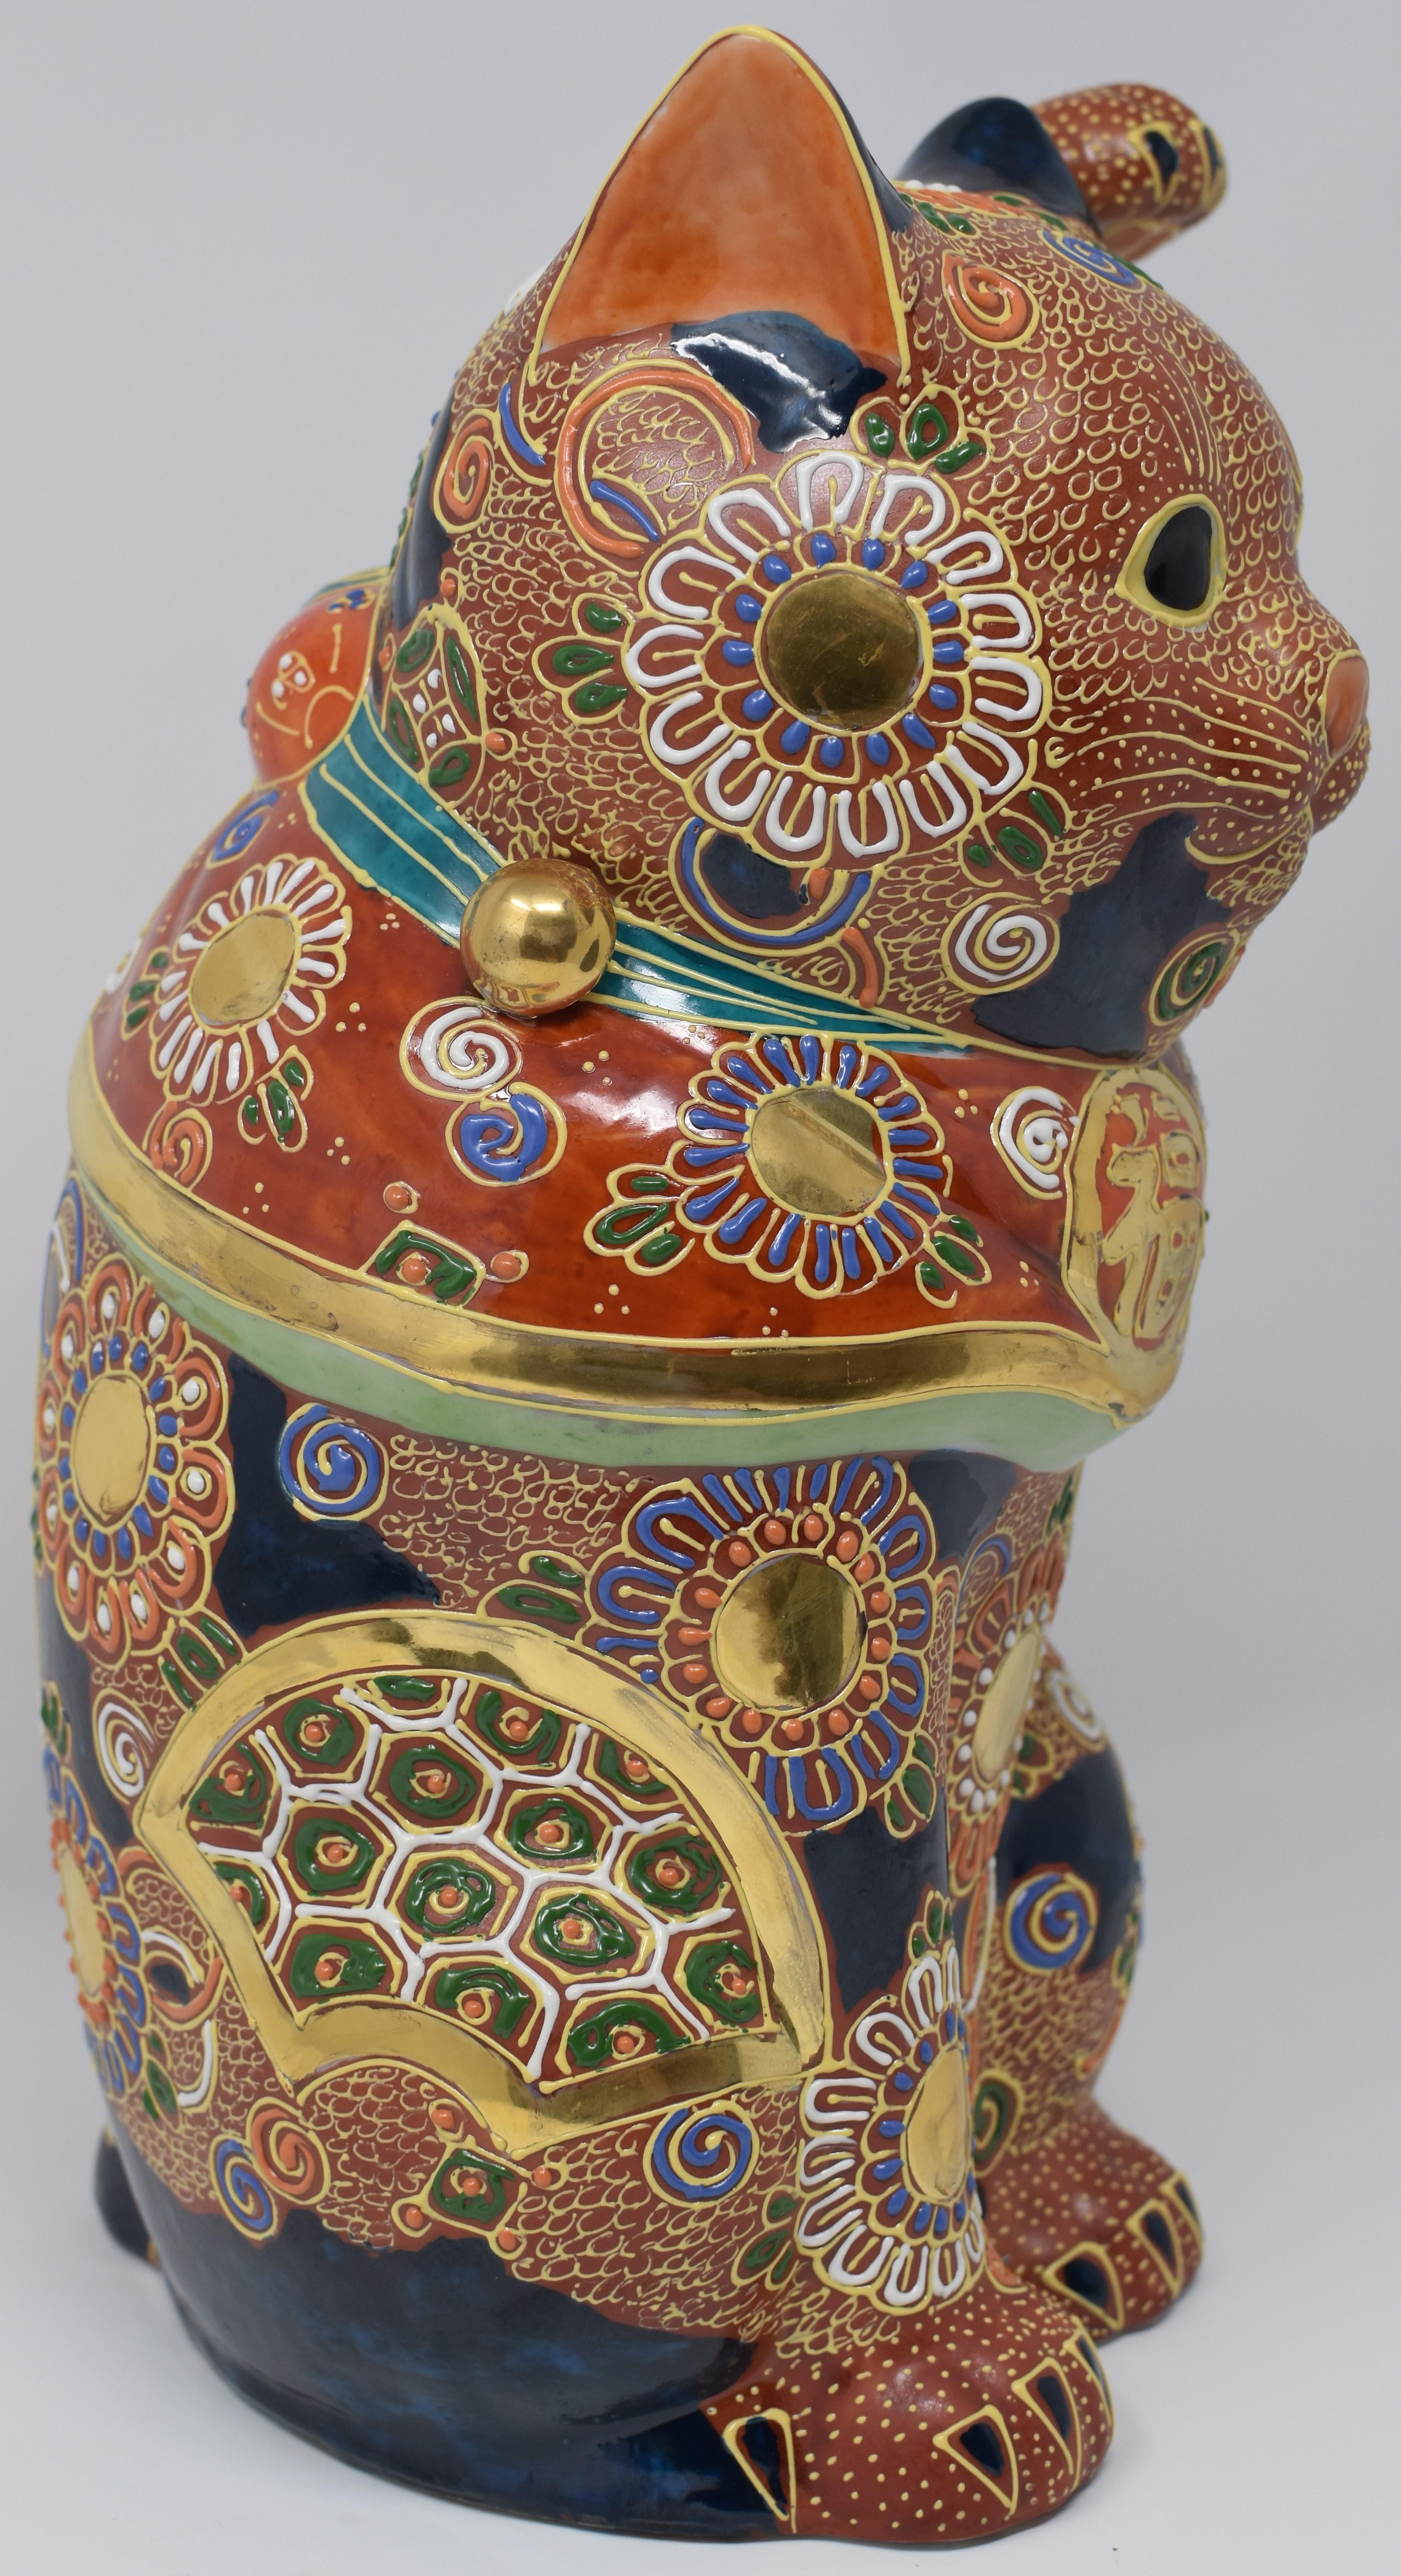 Large contemporary Japanese beckoning cat, a gilded and hand-painted porcelain piece from the Kutani region of Japan. The cat is adorned with multiple golden medallions and is covered with raised loops characteristic of the Kutani “moriage” style.